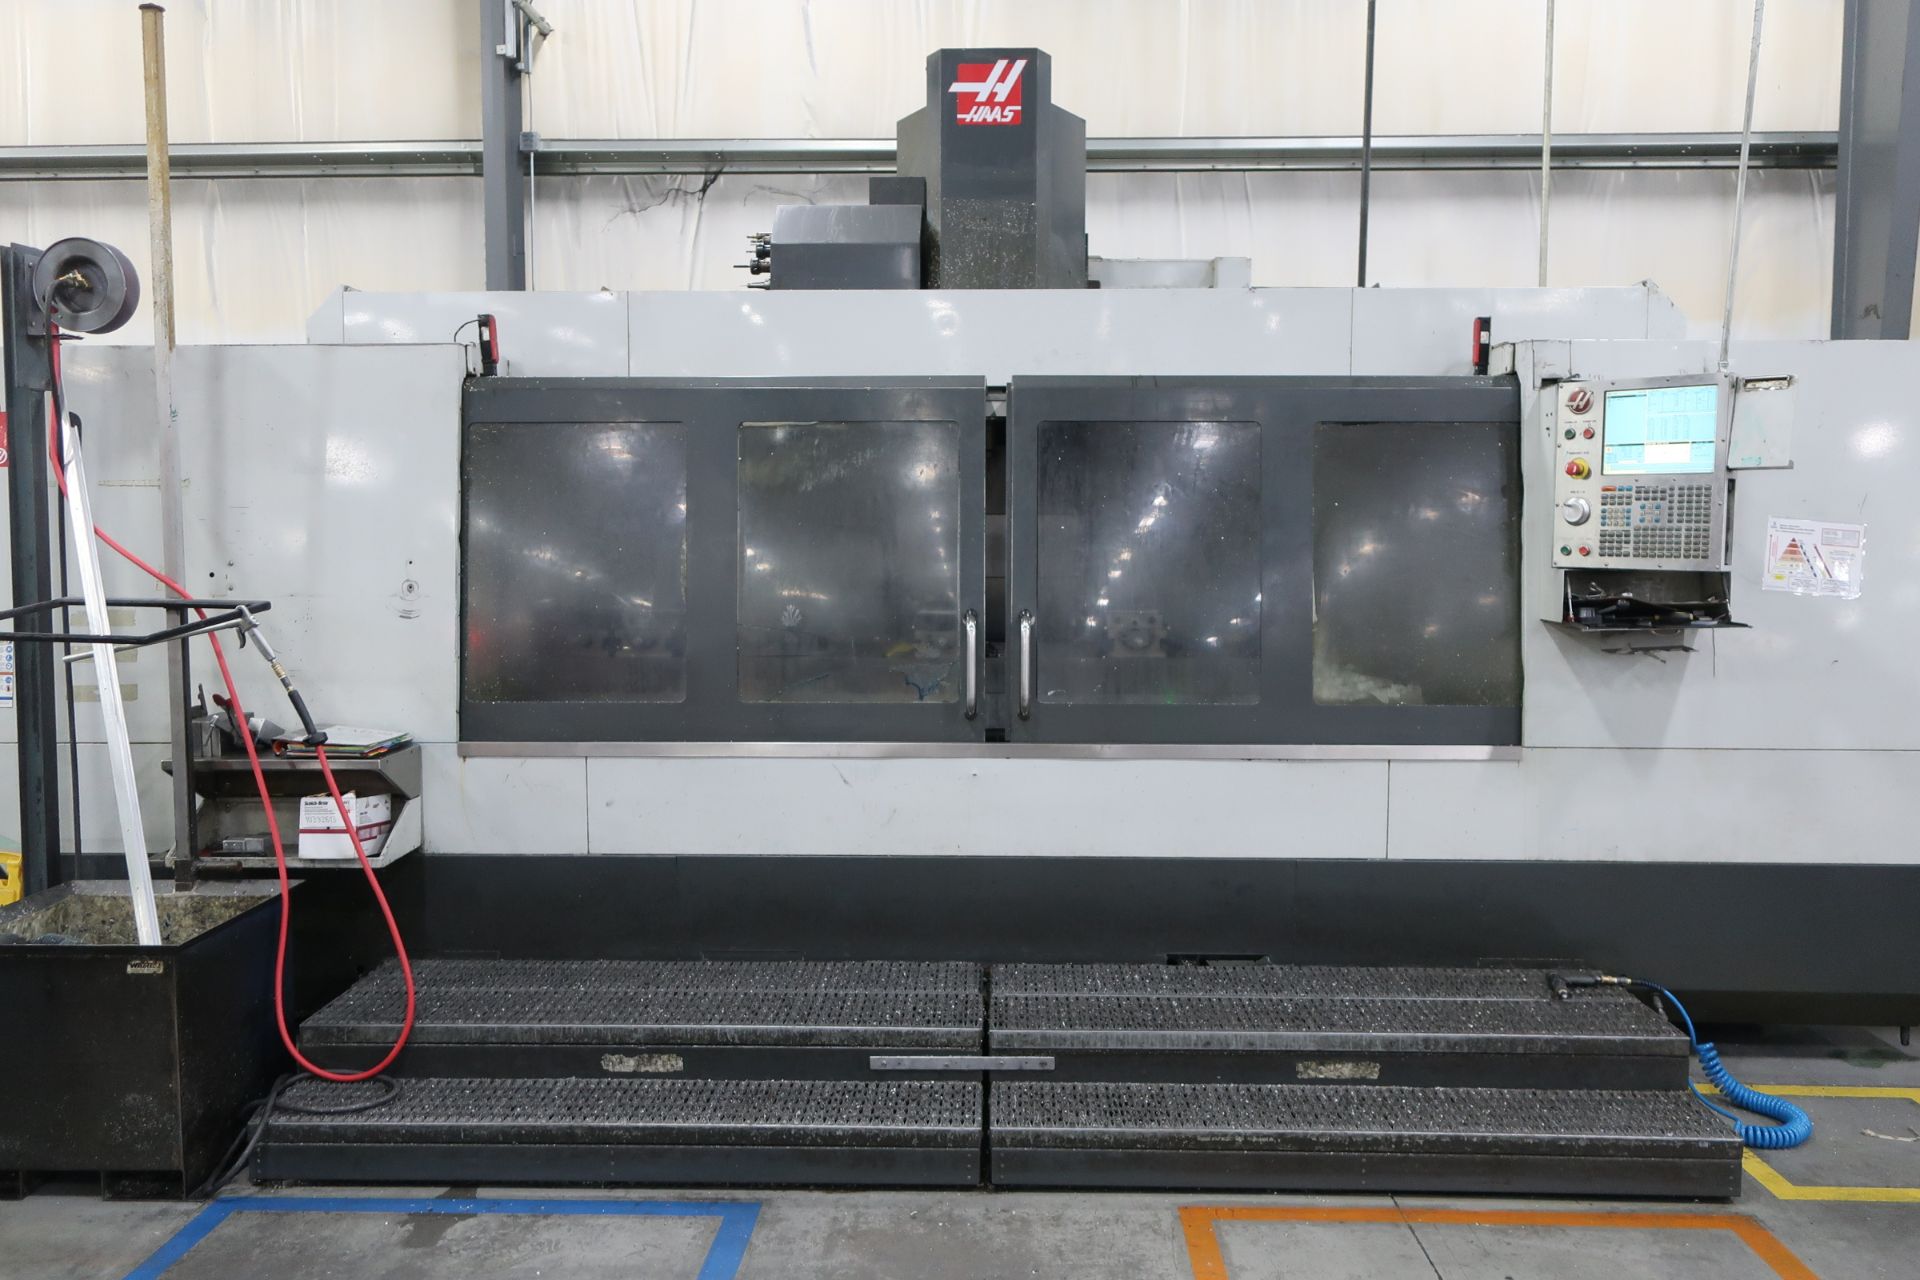 28" x 120" HAAS VF10/40 CNC VERTICAL MACHINING CENTER, NEW 2013 - Image 3 of 21